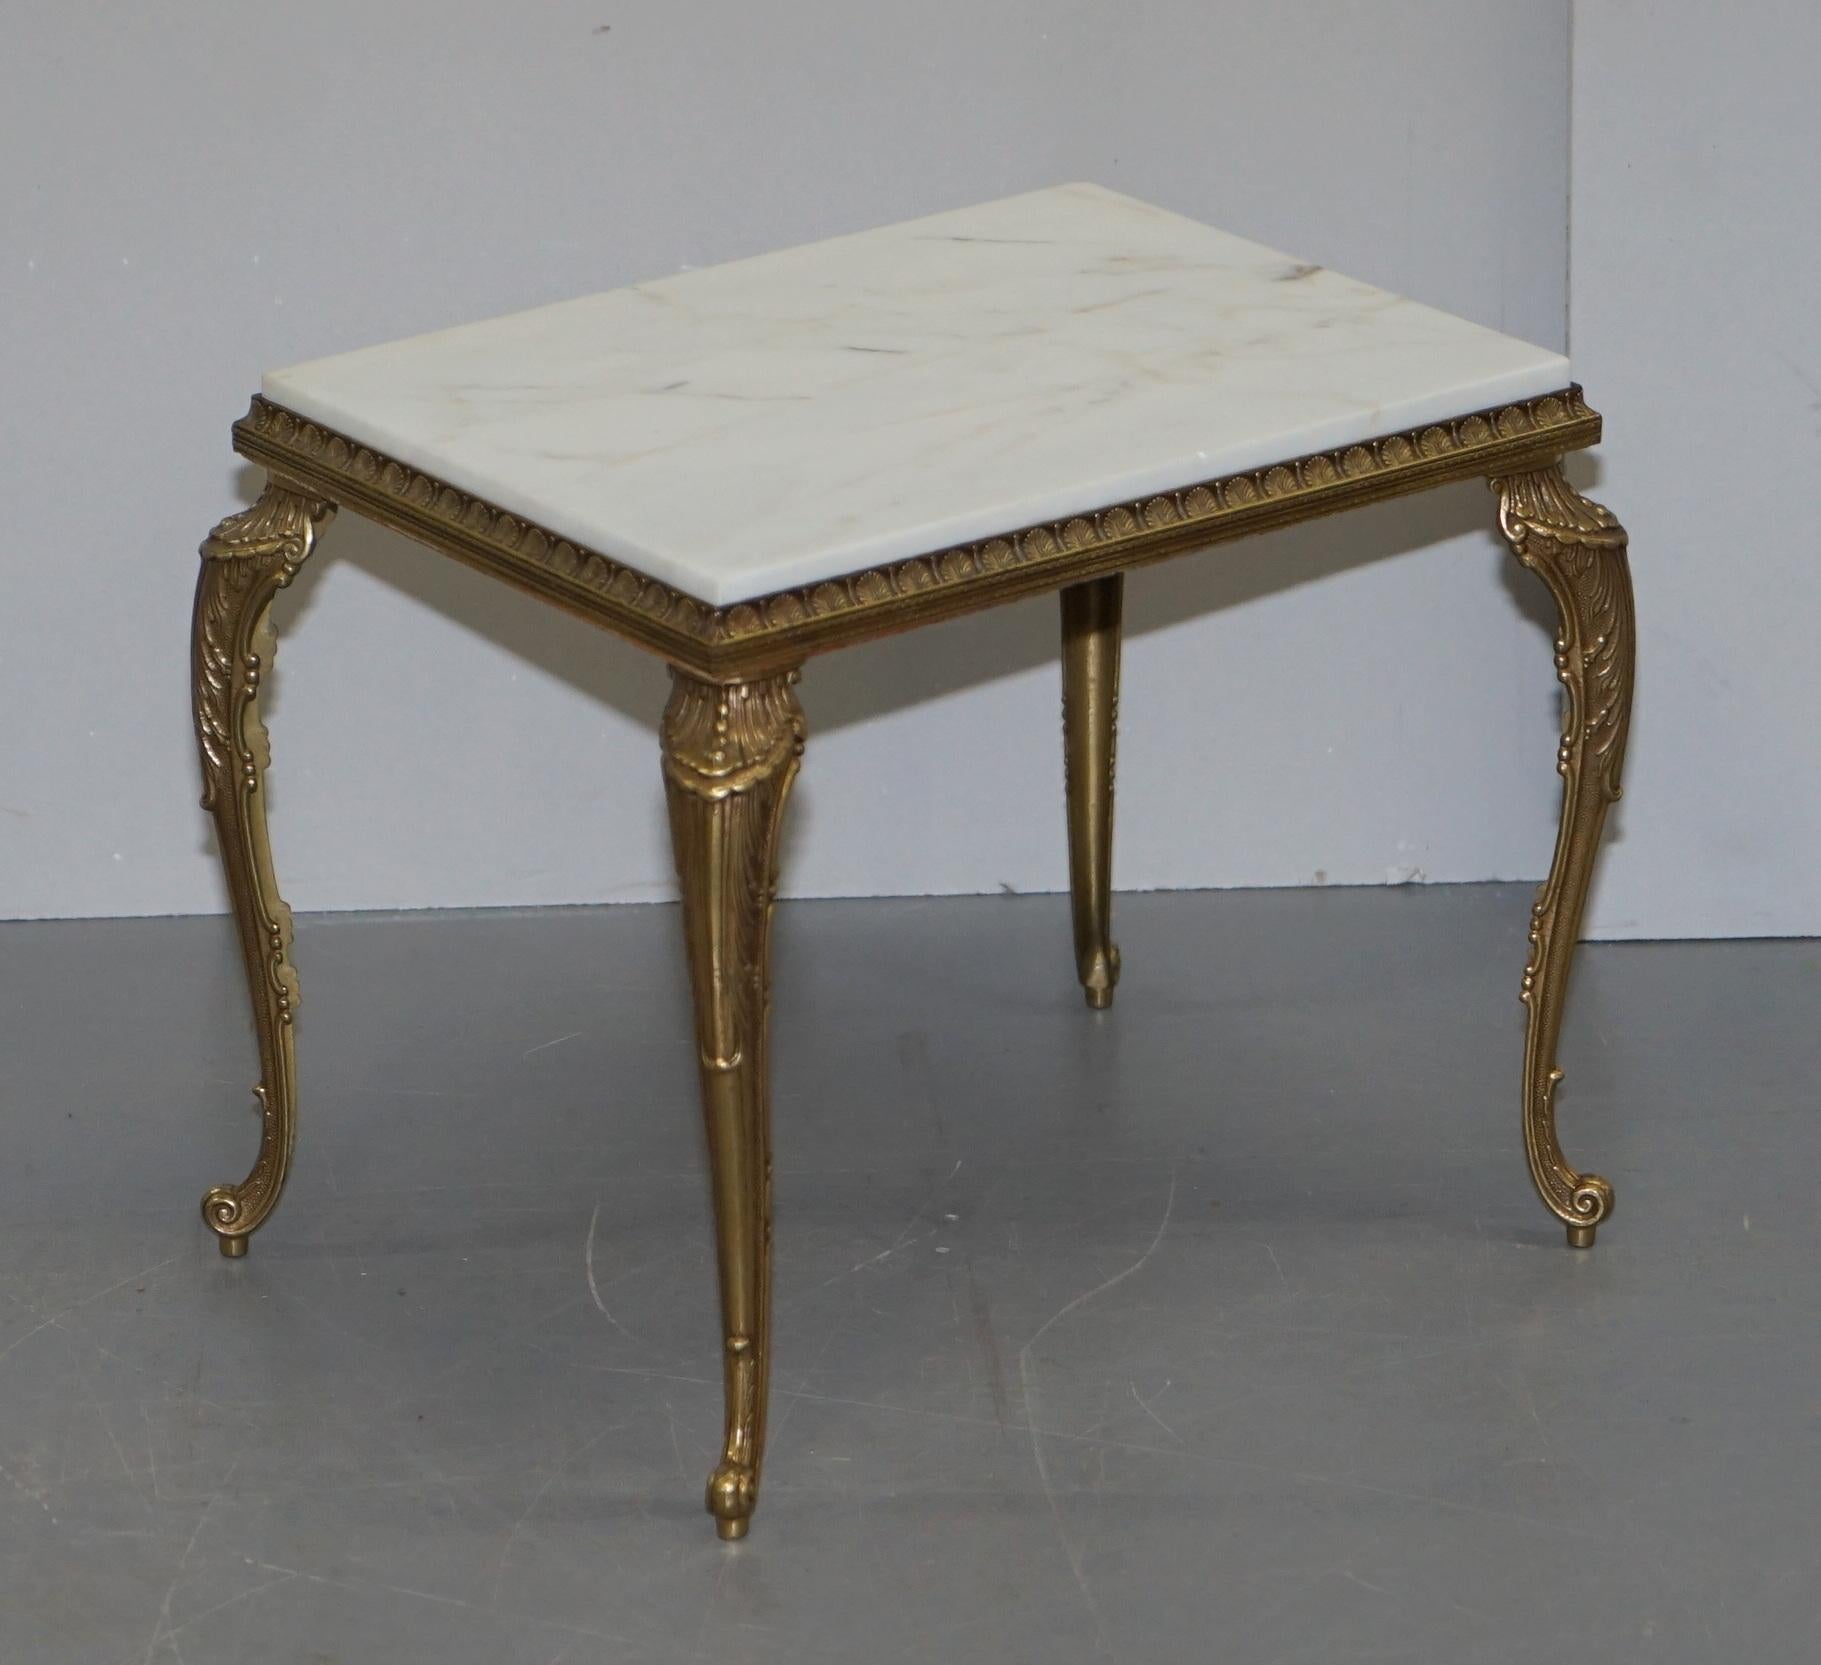 We are delighted to offer for sale this lovely pair of original circa 1900 French brass side tables with Italian Carrera marble tops

A very good looking well made and decorative pair, the frames are brass with a bronzed finish, the tops are hand